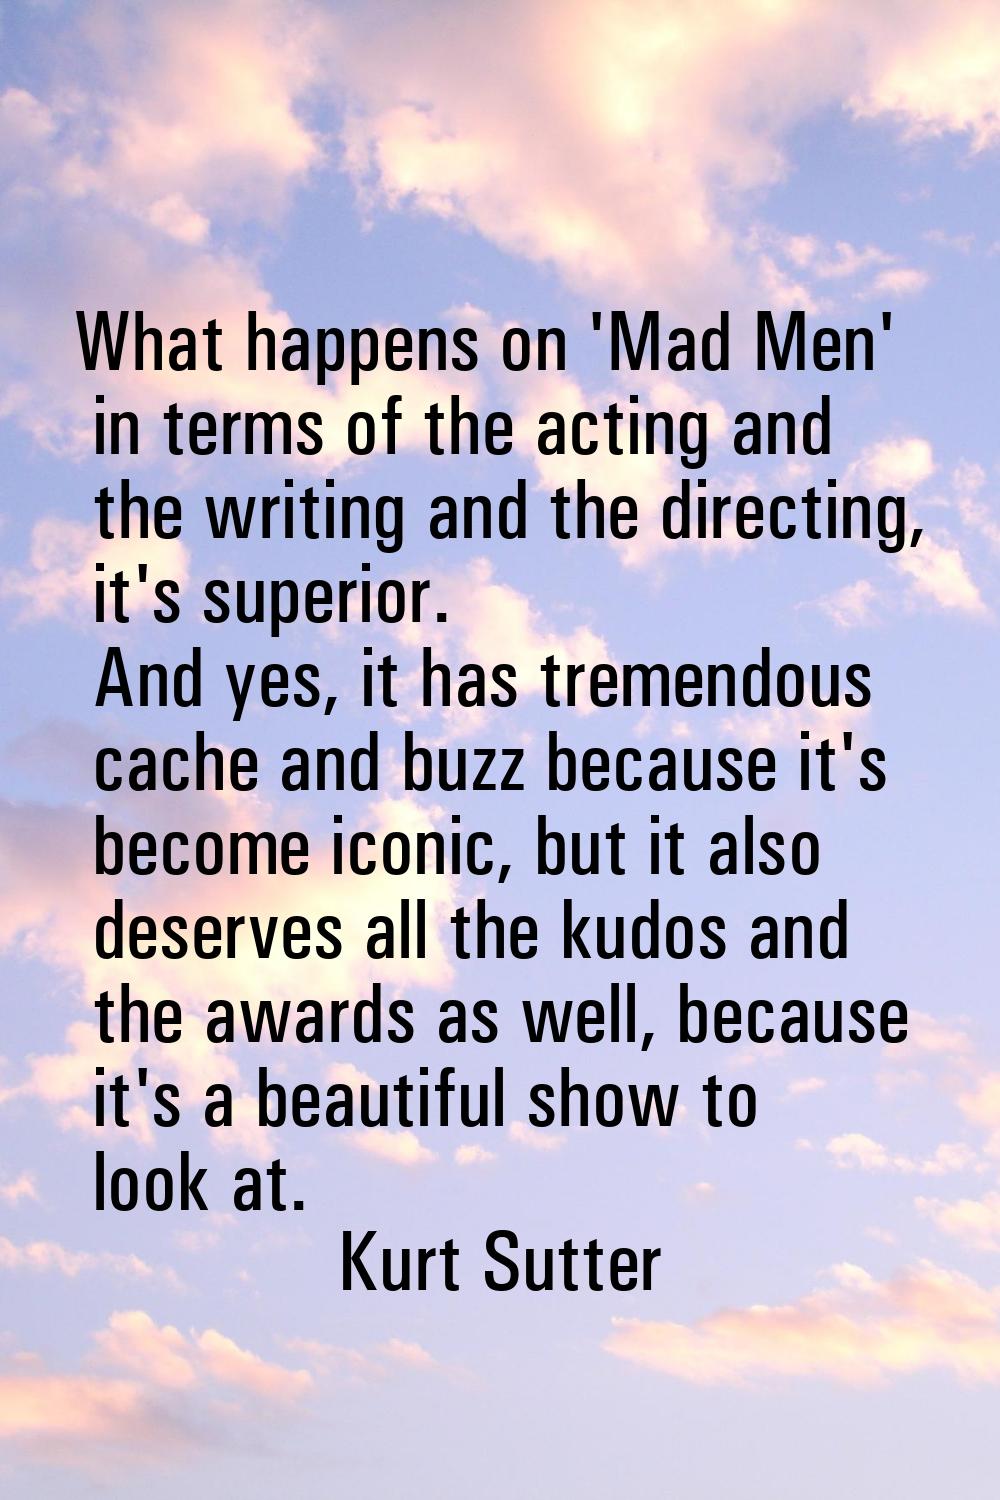 What happens on 'Mad Men' in terms of the acting and the writing and the directing, it's superior. 